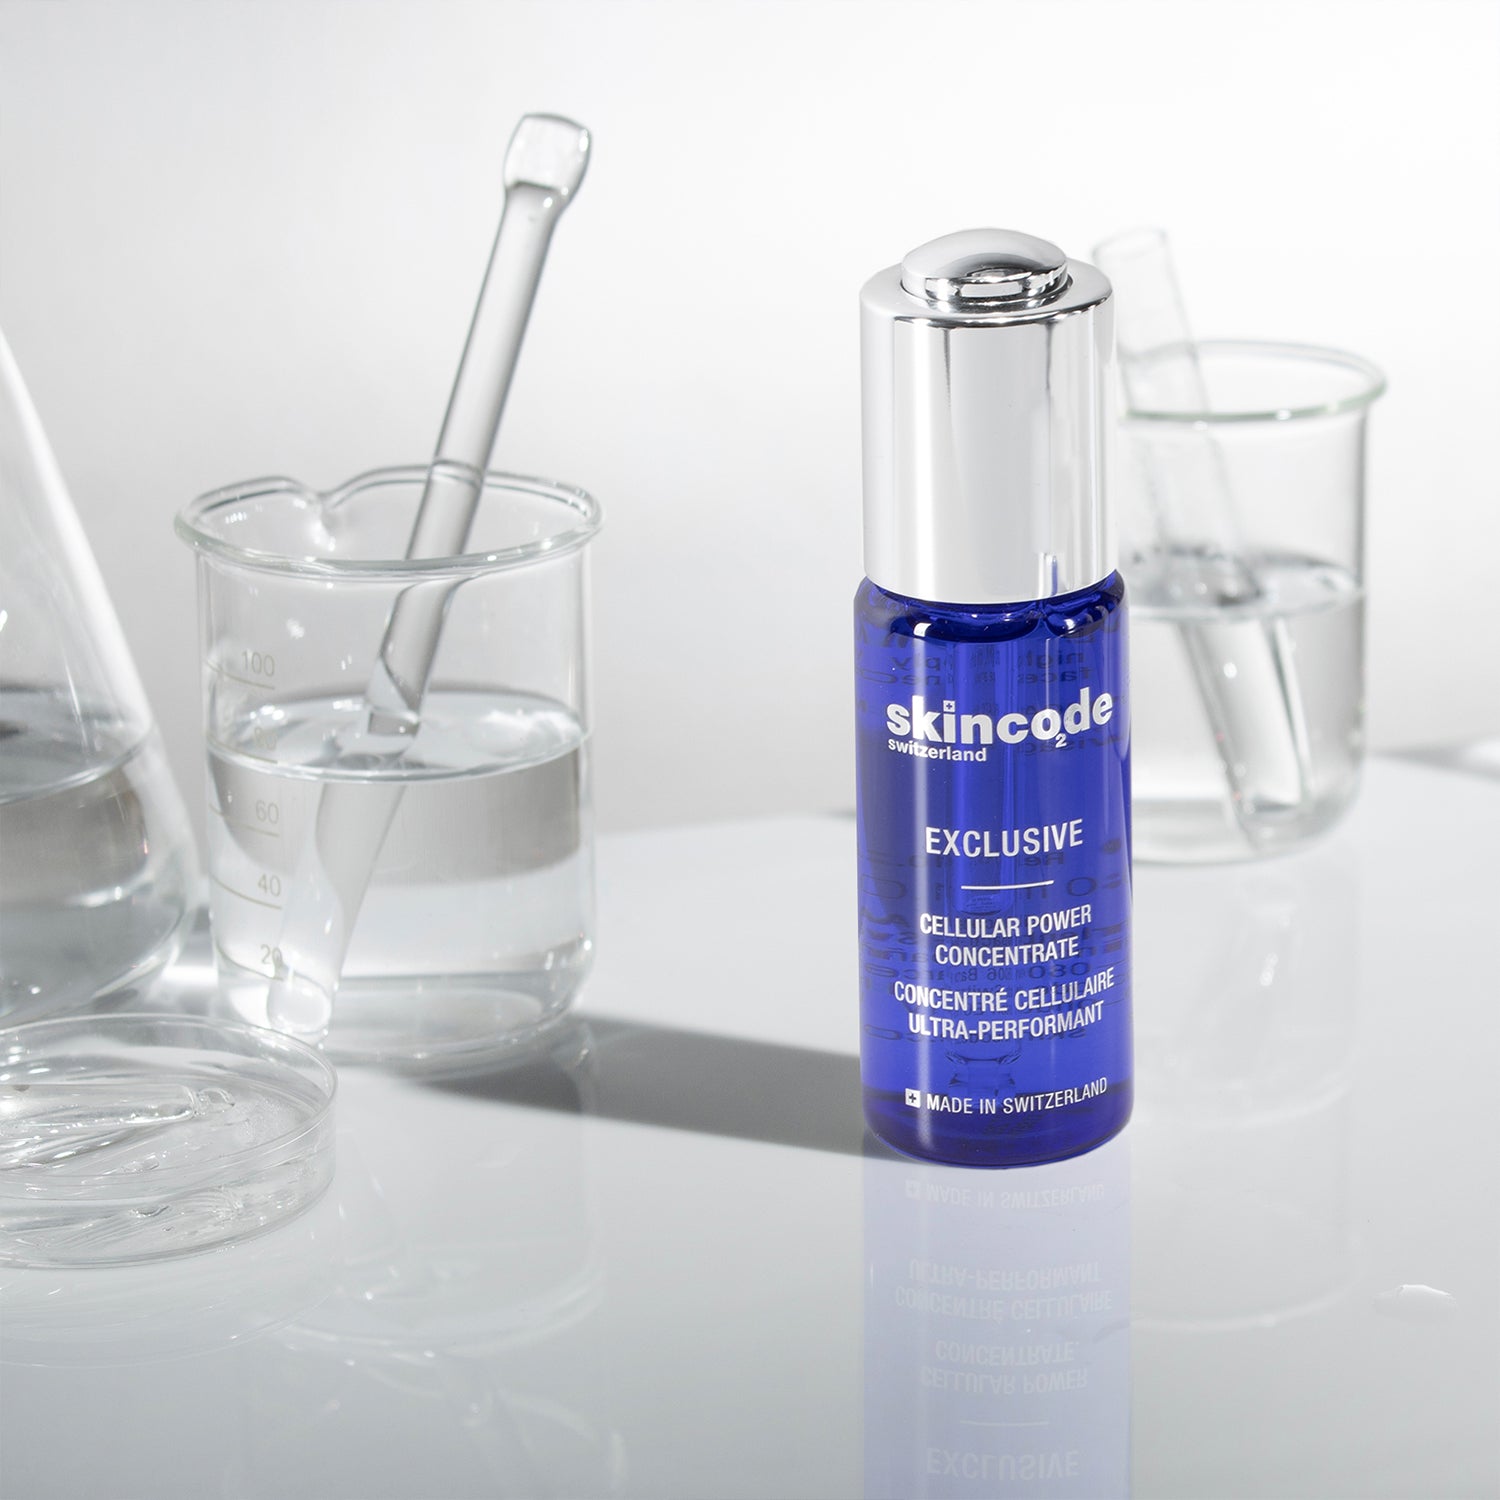 SkinCode Exclusive, Cellular Power Concentrate